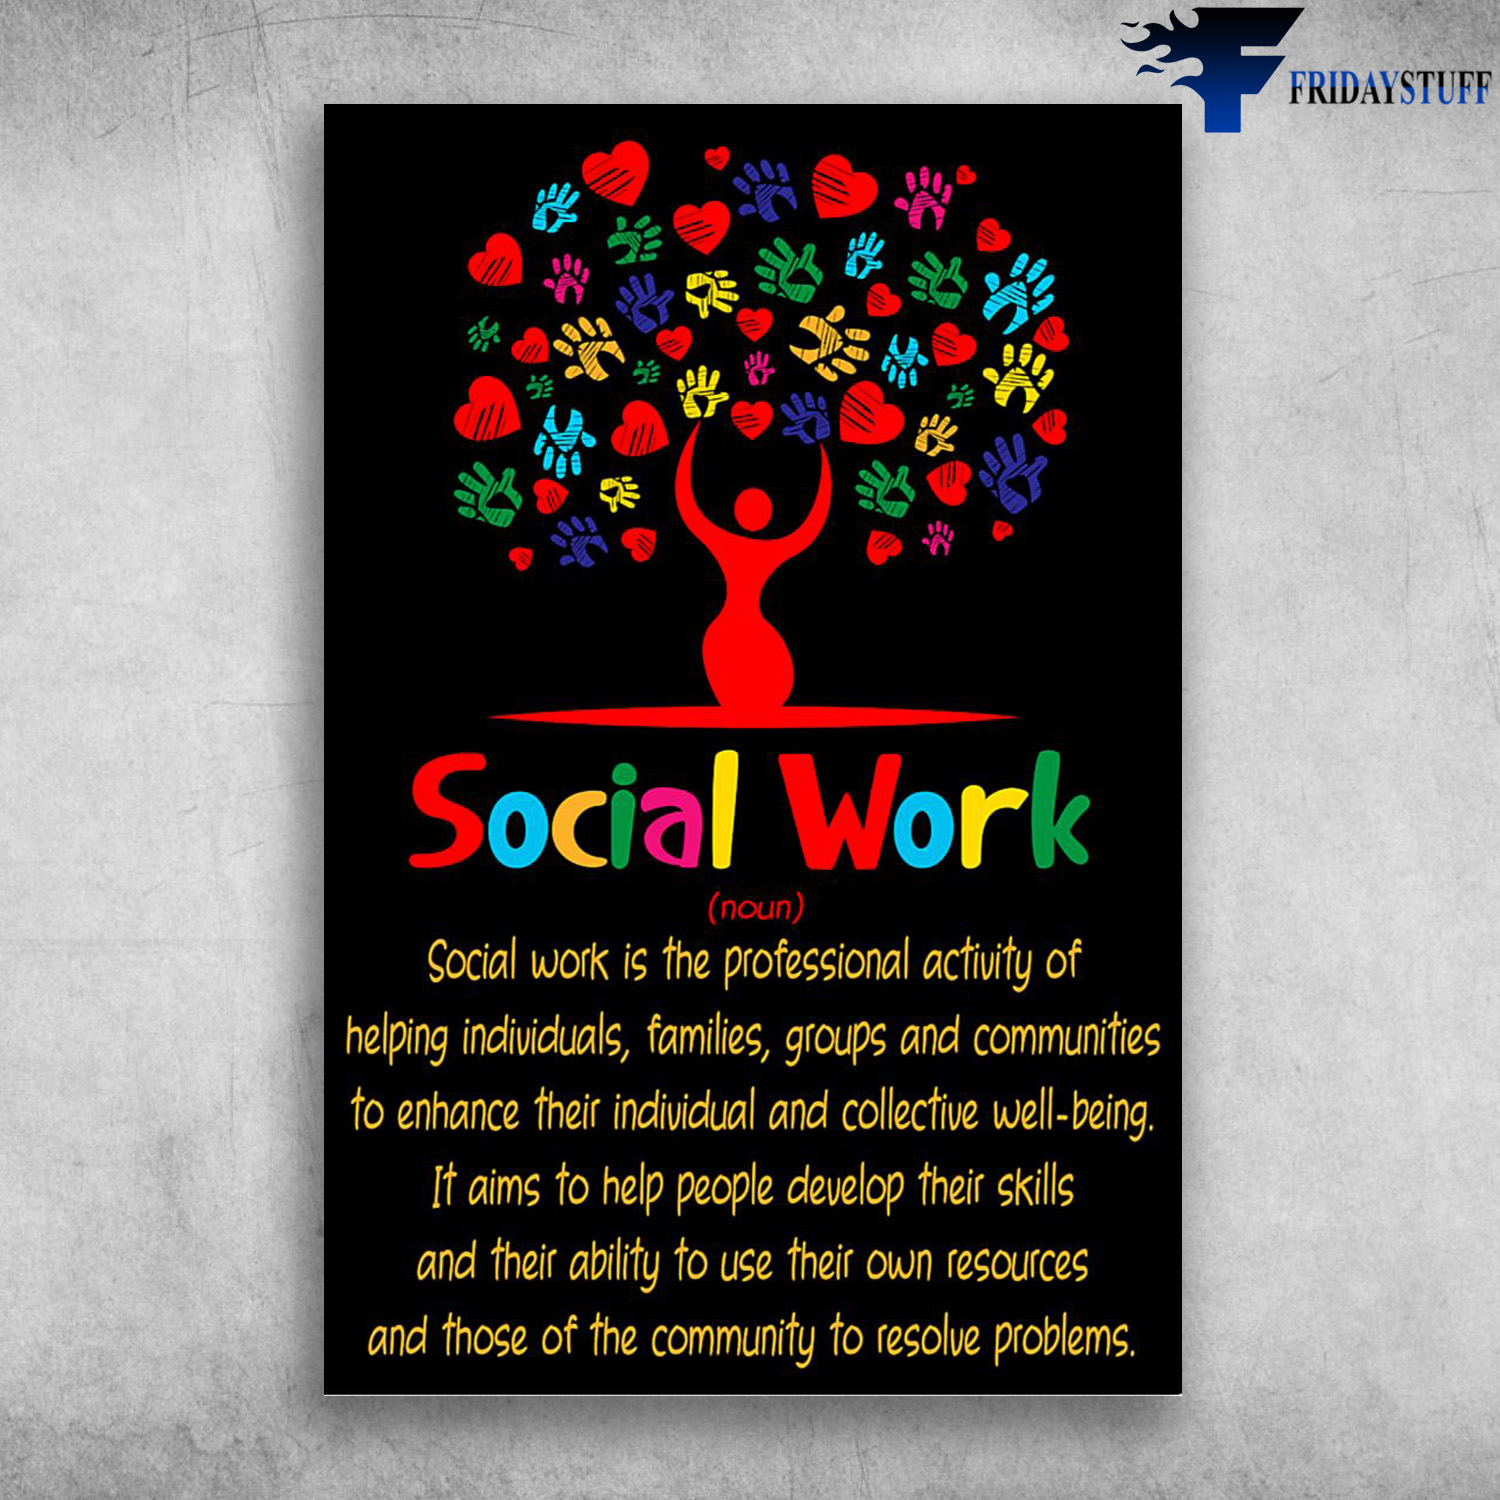 Social Work - Social Work Is The Professional Activity Of Helping Individuals, Families, Group And Communities To Enhace Their Individual And Collective Well-Being